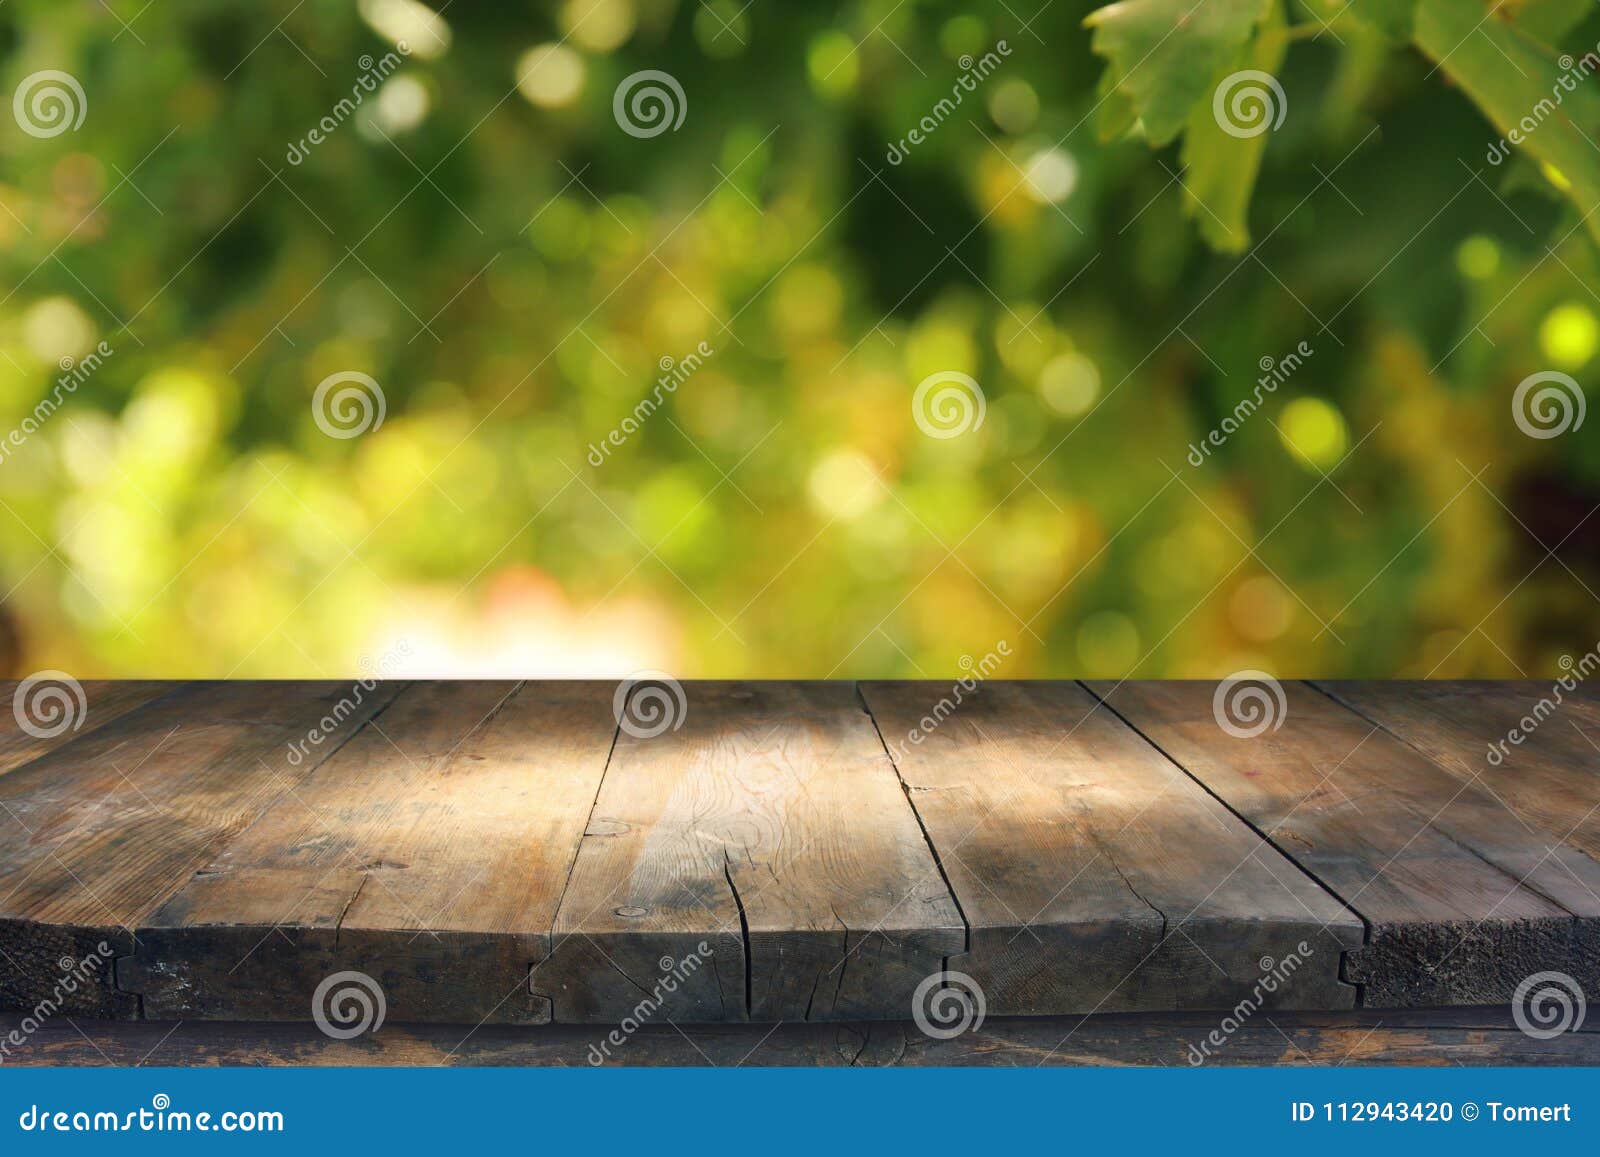 empty rustic table in front of green spring abstract bokeh background. product display and picnic concept.